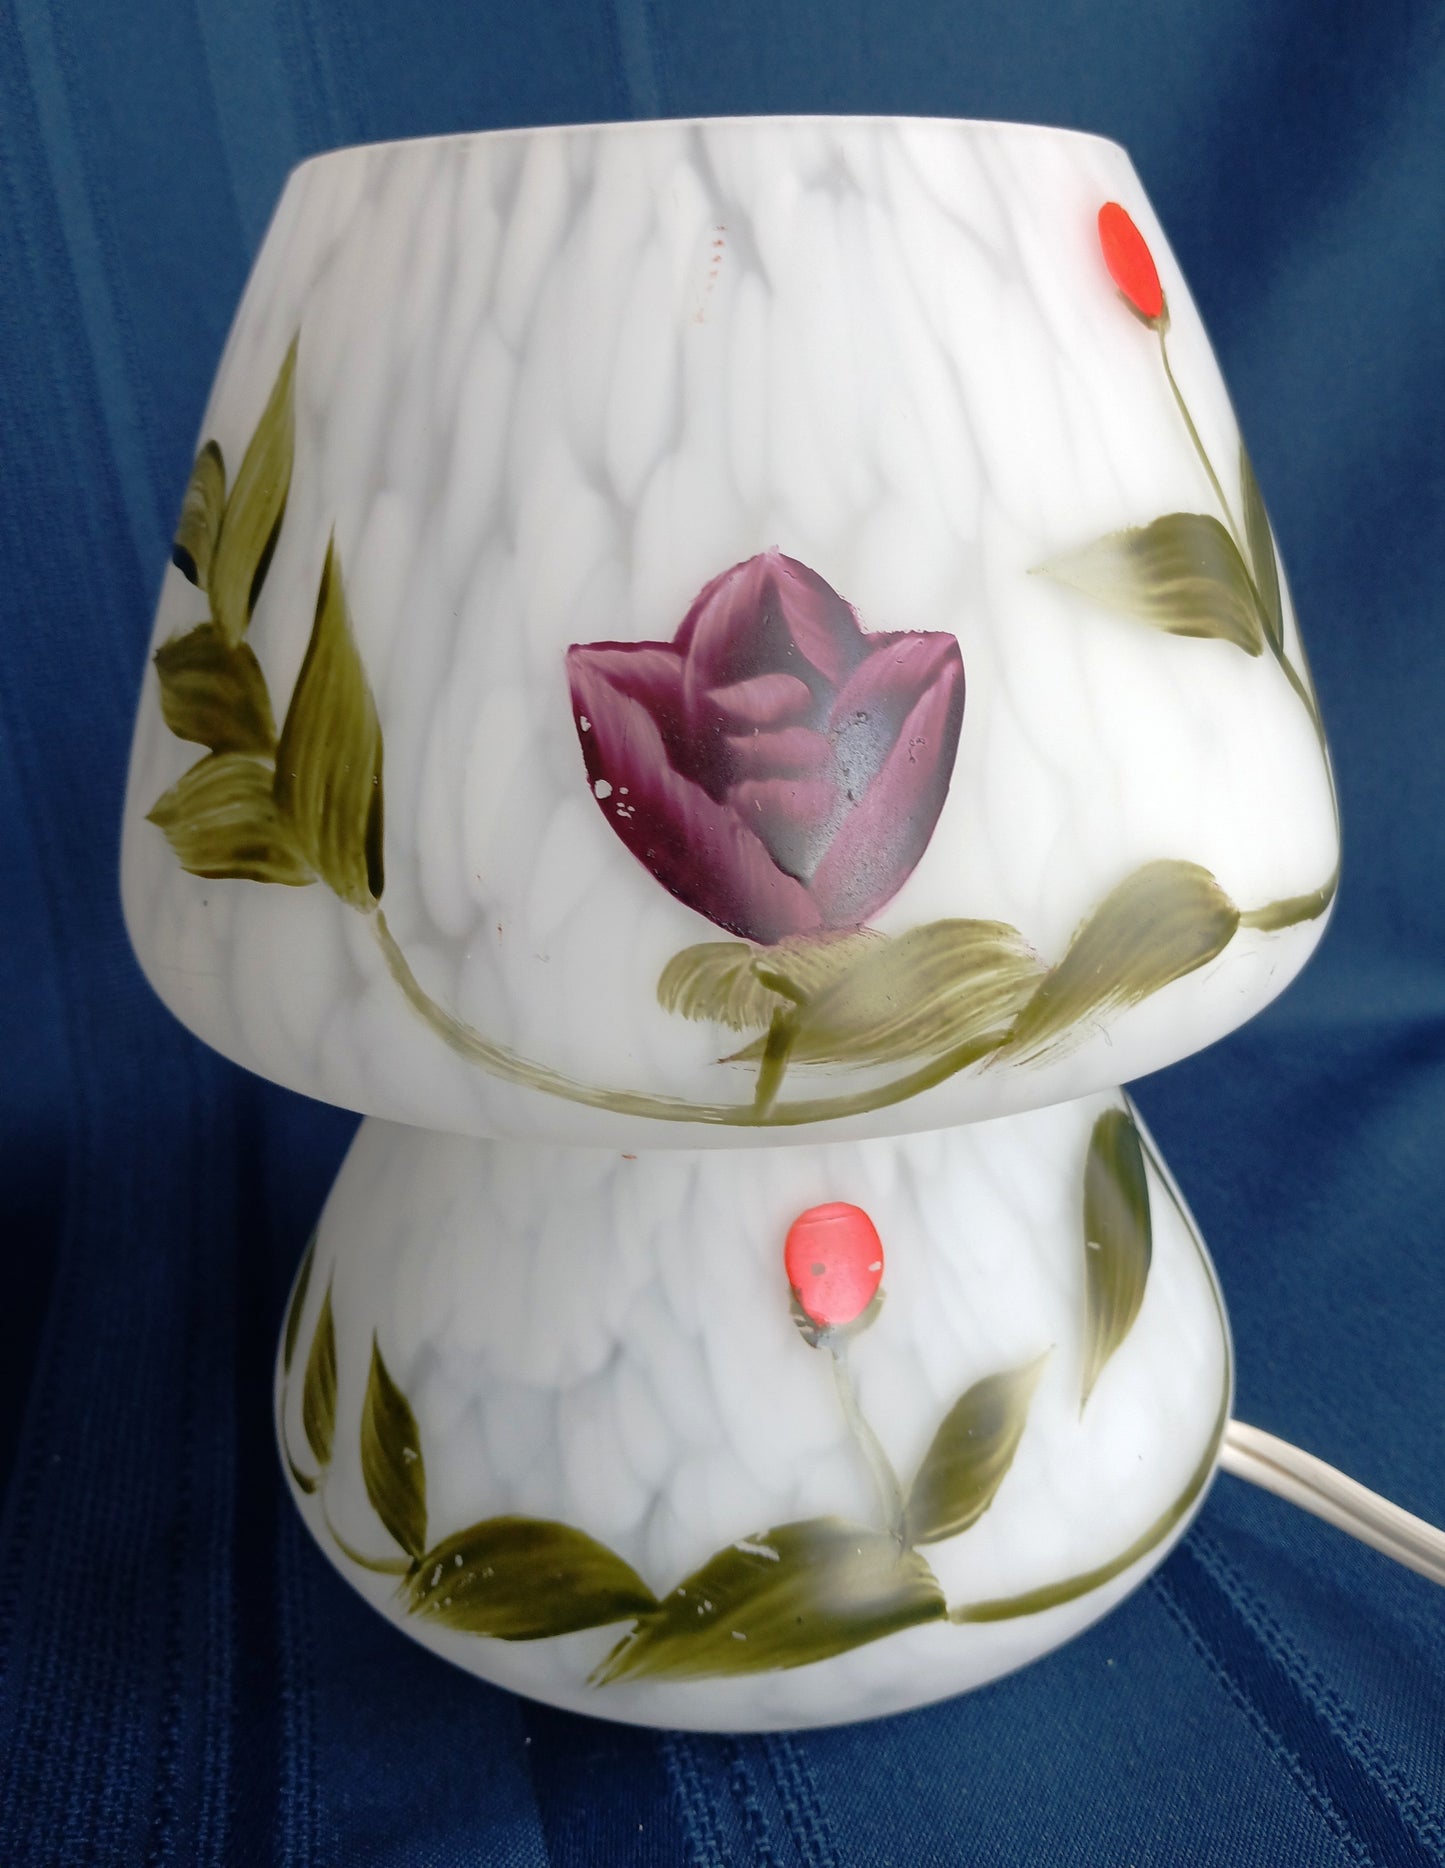 Vintage Mid Century Modern Hand Painted Floral Satin Frosted Glass Table Lamp Mushroom Shaped Empoli Style in Line Switch Lamp